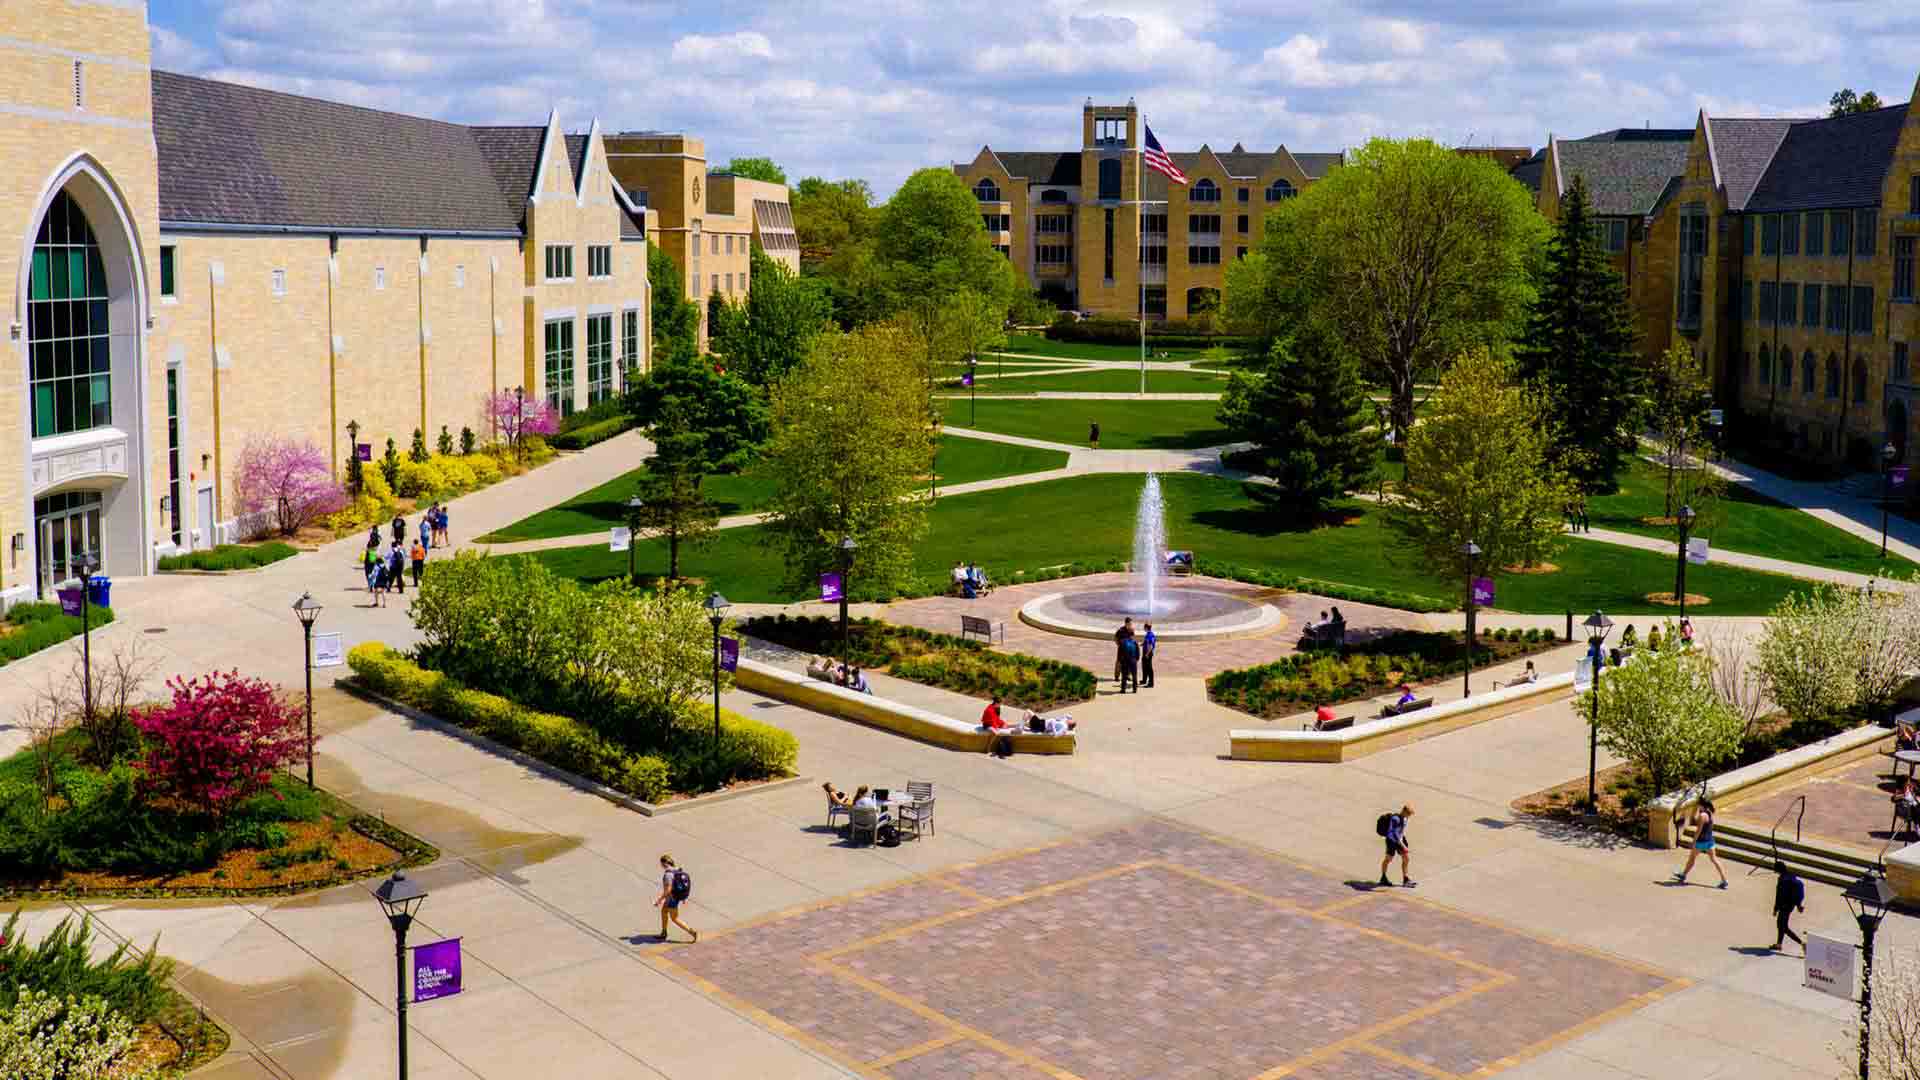 View of the lower quad from above